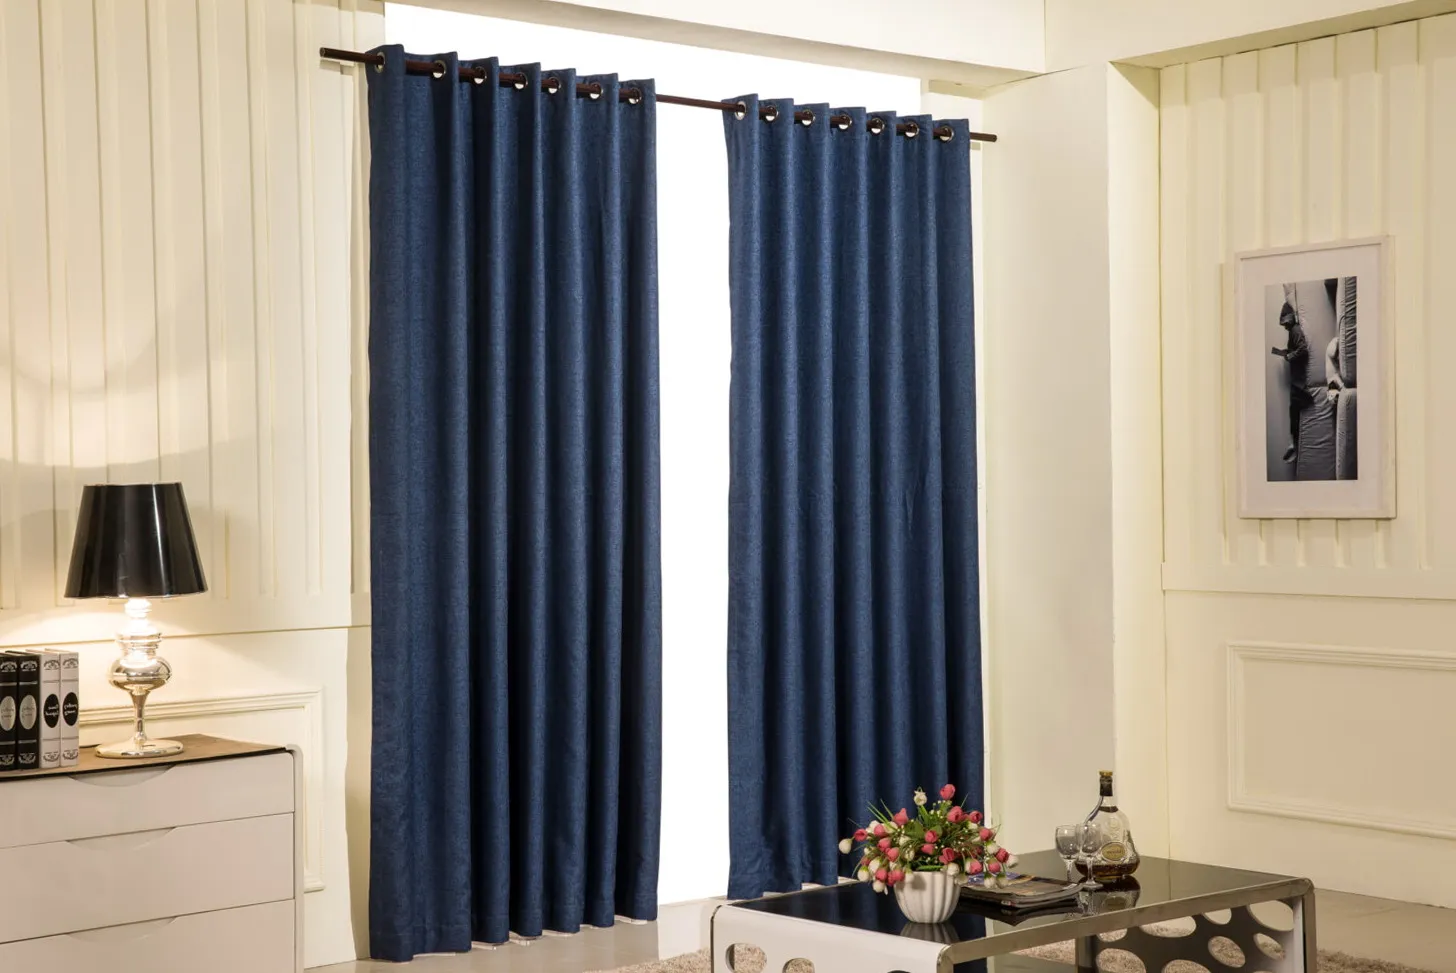 How Blackout Curtains are a Decorative Item for Your Home?